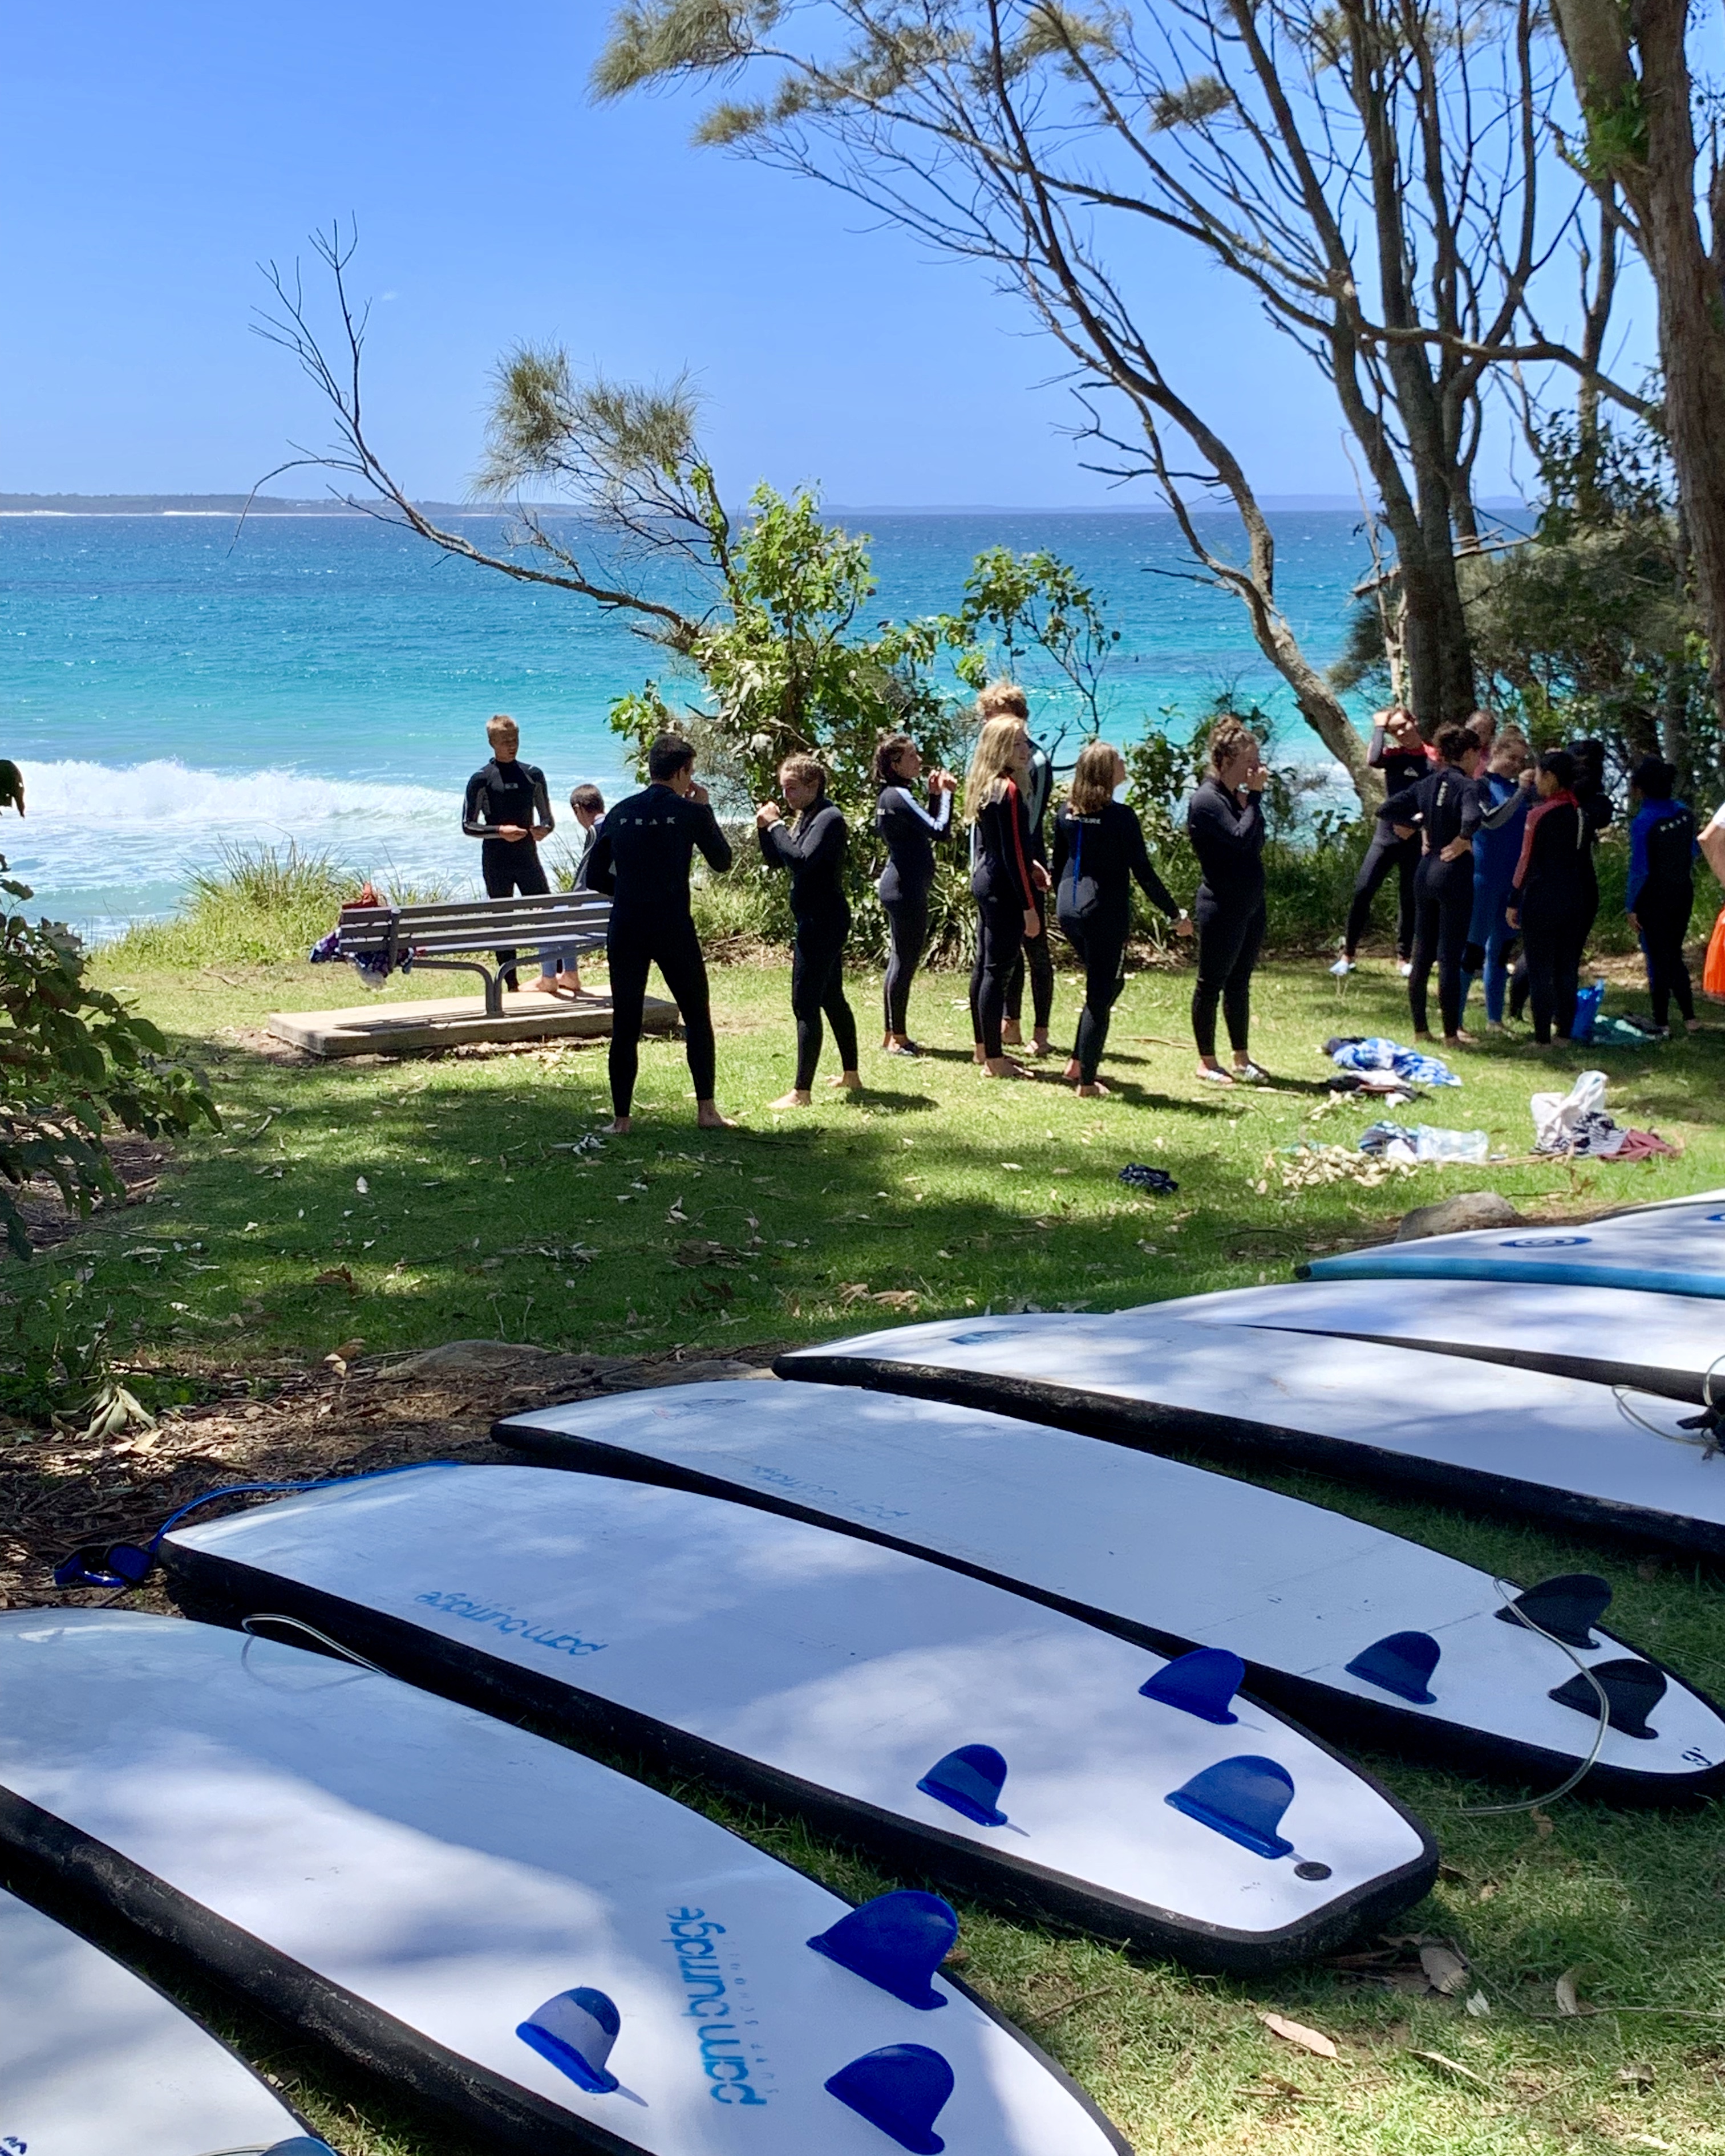 Surf school for Rotary Exchange Students